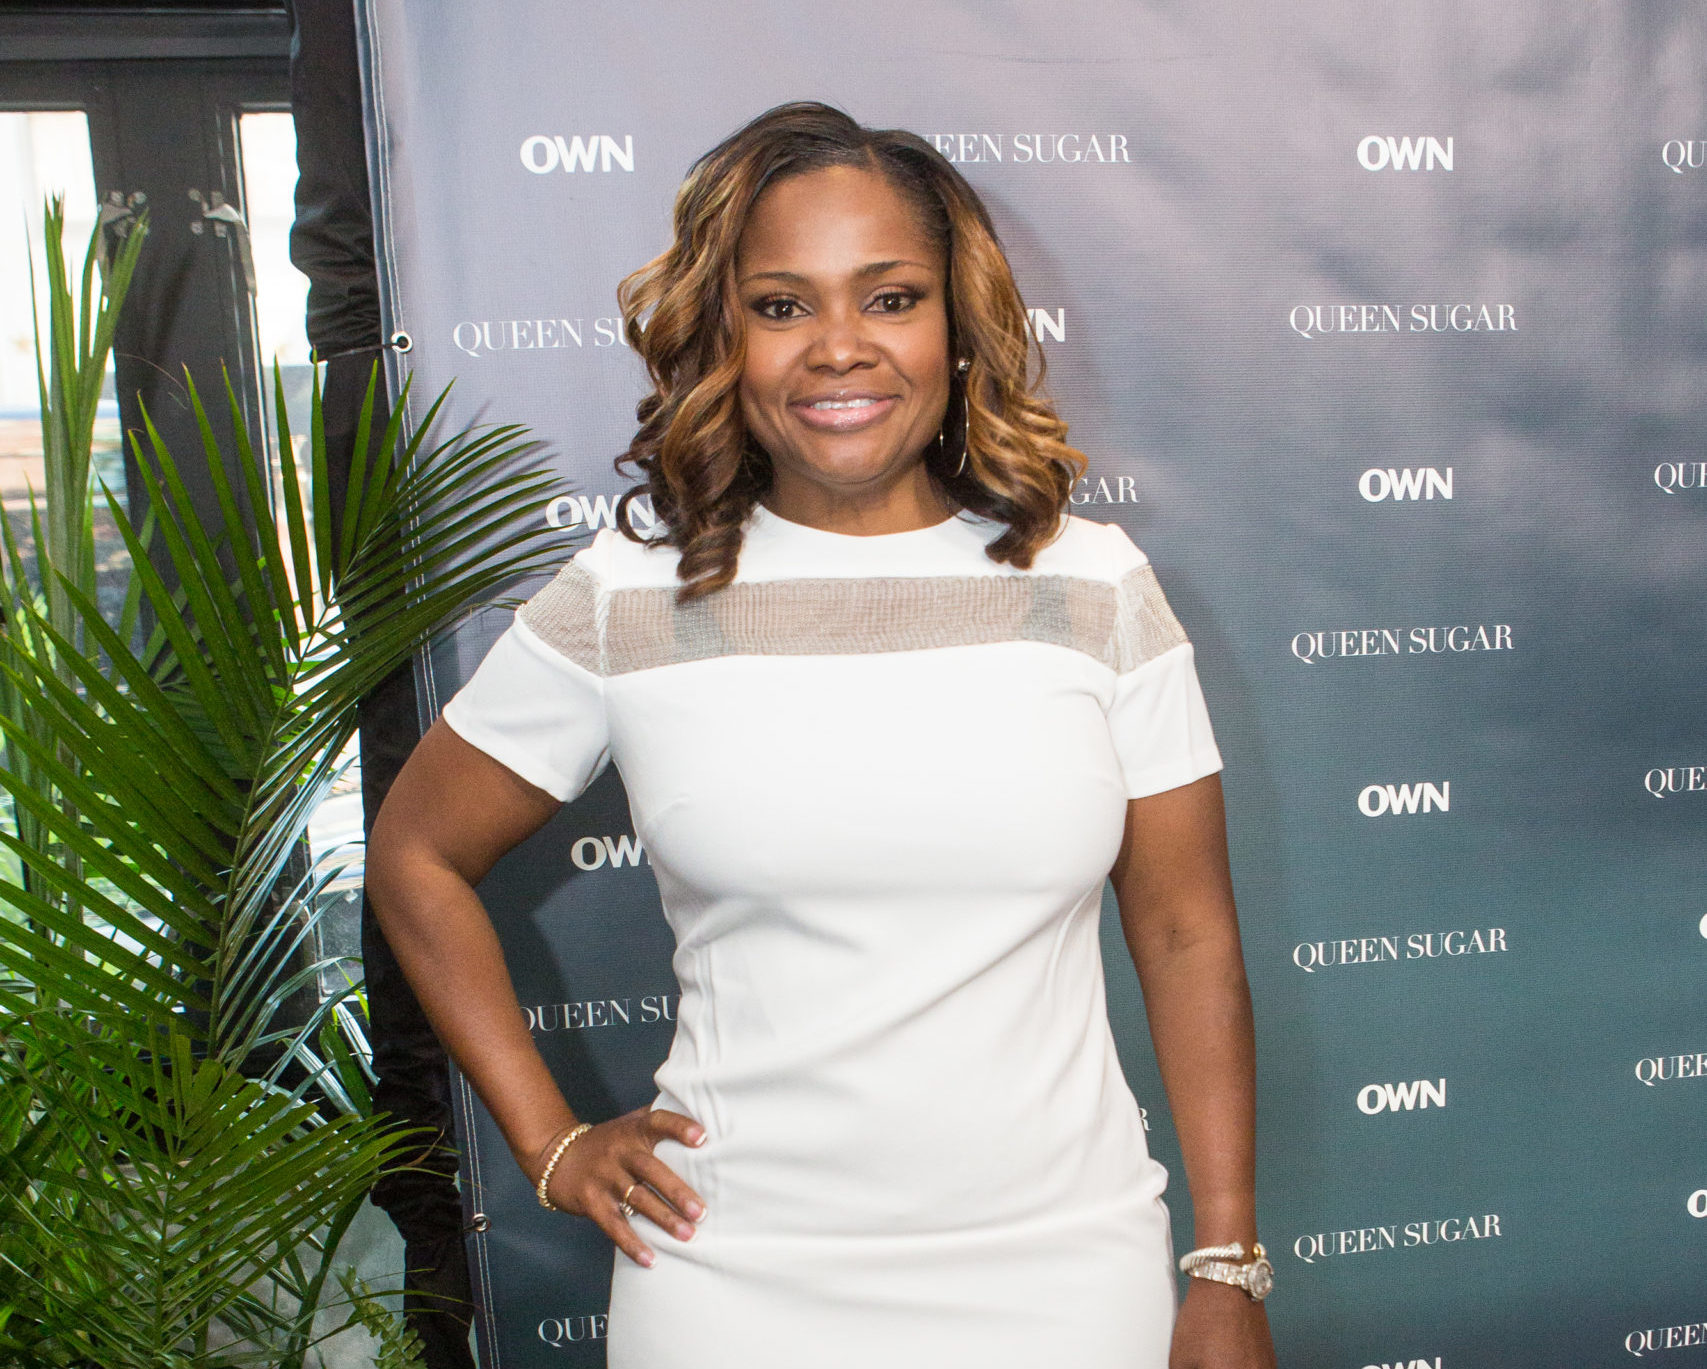 Heavenly "Married to Medicine" star Dr. Heavenly gets dragged on social media after advising job seekers to work for free to get hired by prospective employers.